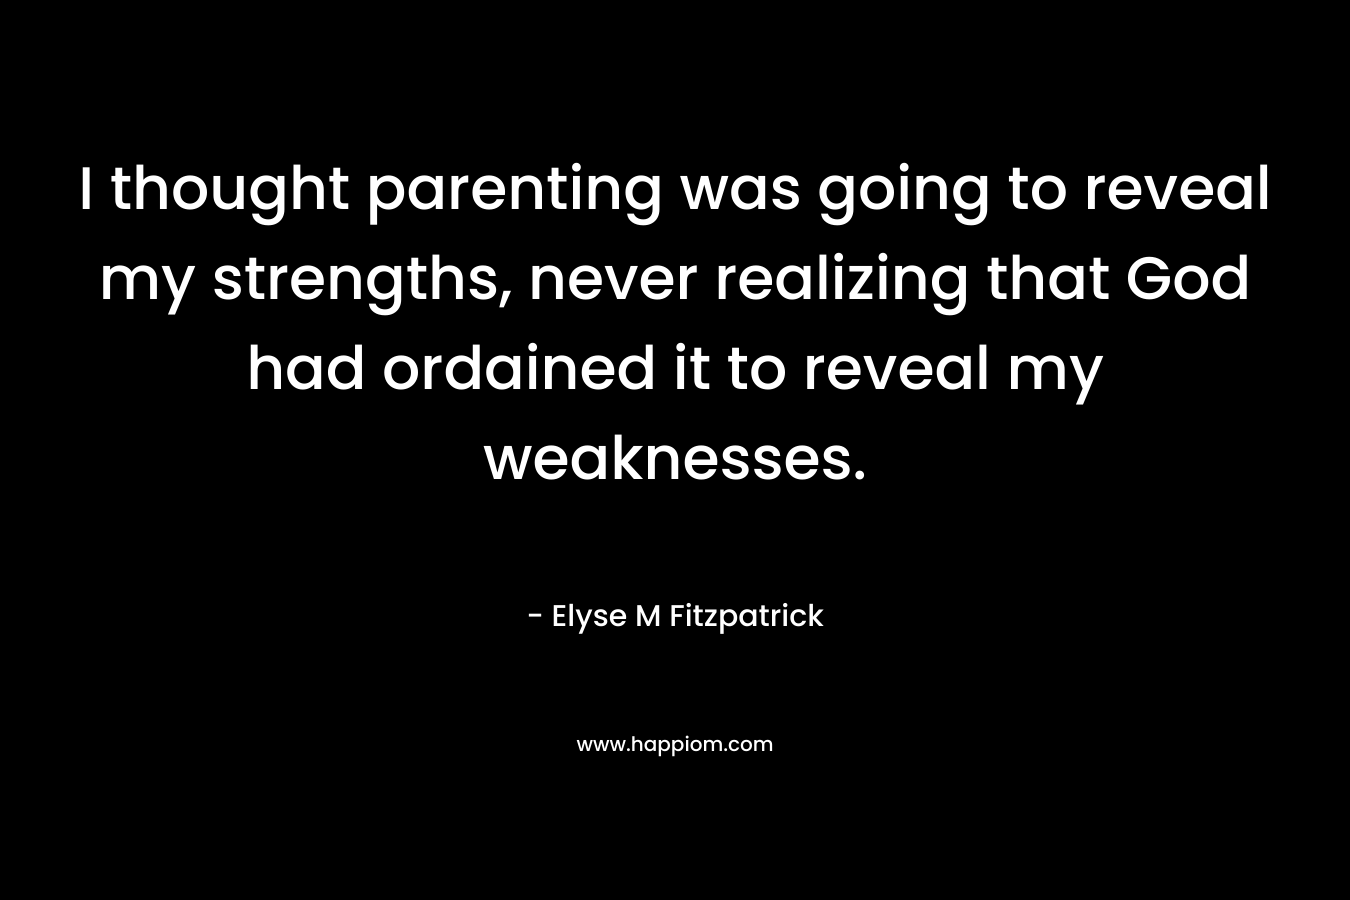 I thought parenting was going to reveal my strengths, never realizing that God had ordained it to reveal my weaknesses. – Elyse M Fitzpatrick